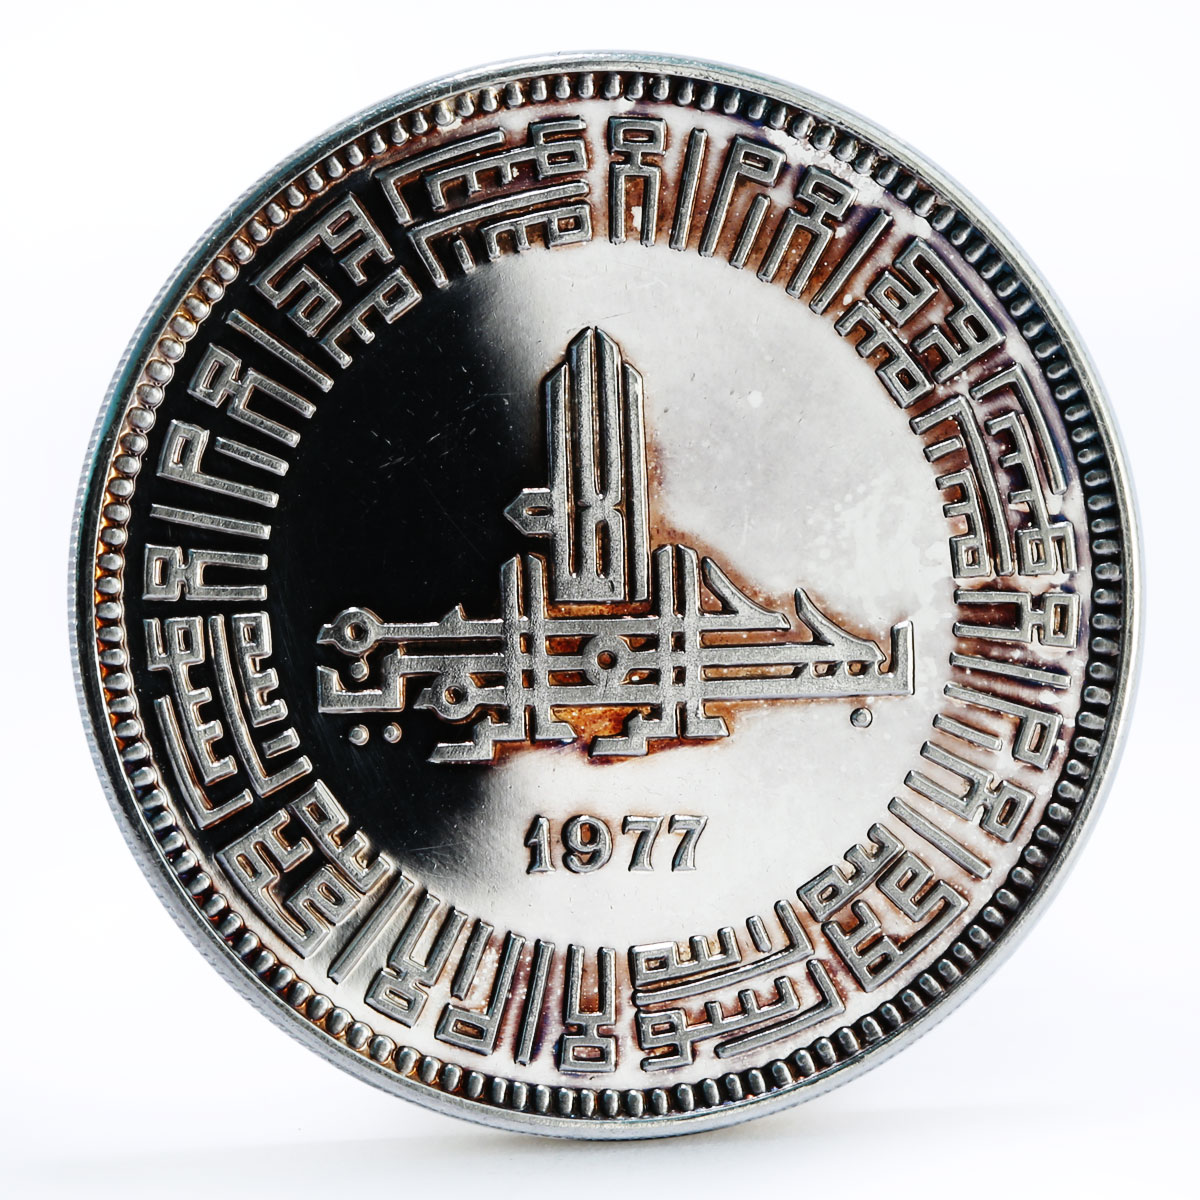 Pakistan 100 rupees Islamic Summit Conference Monument proof silver coin 1977